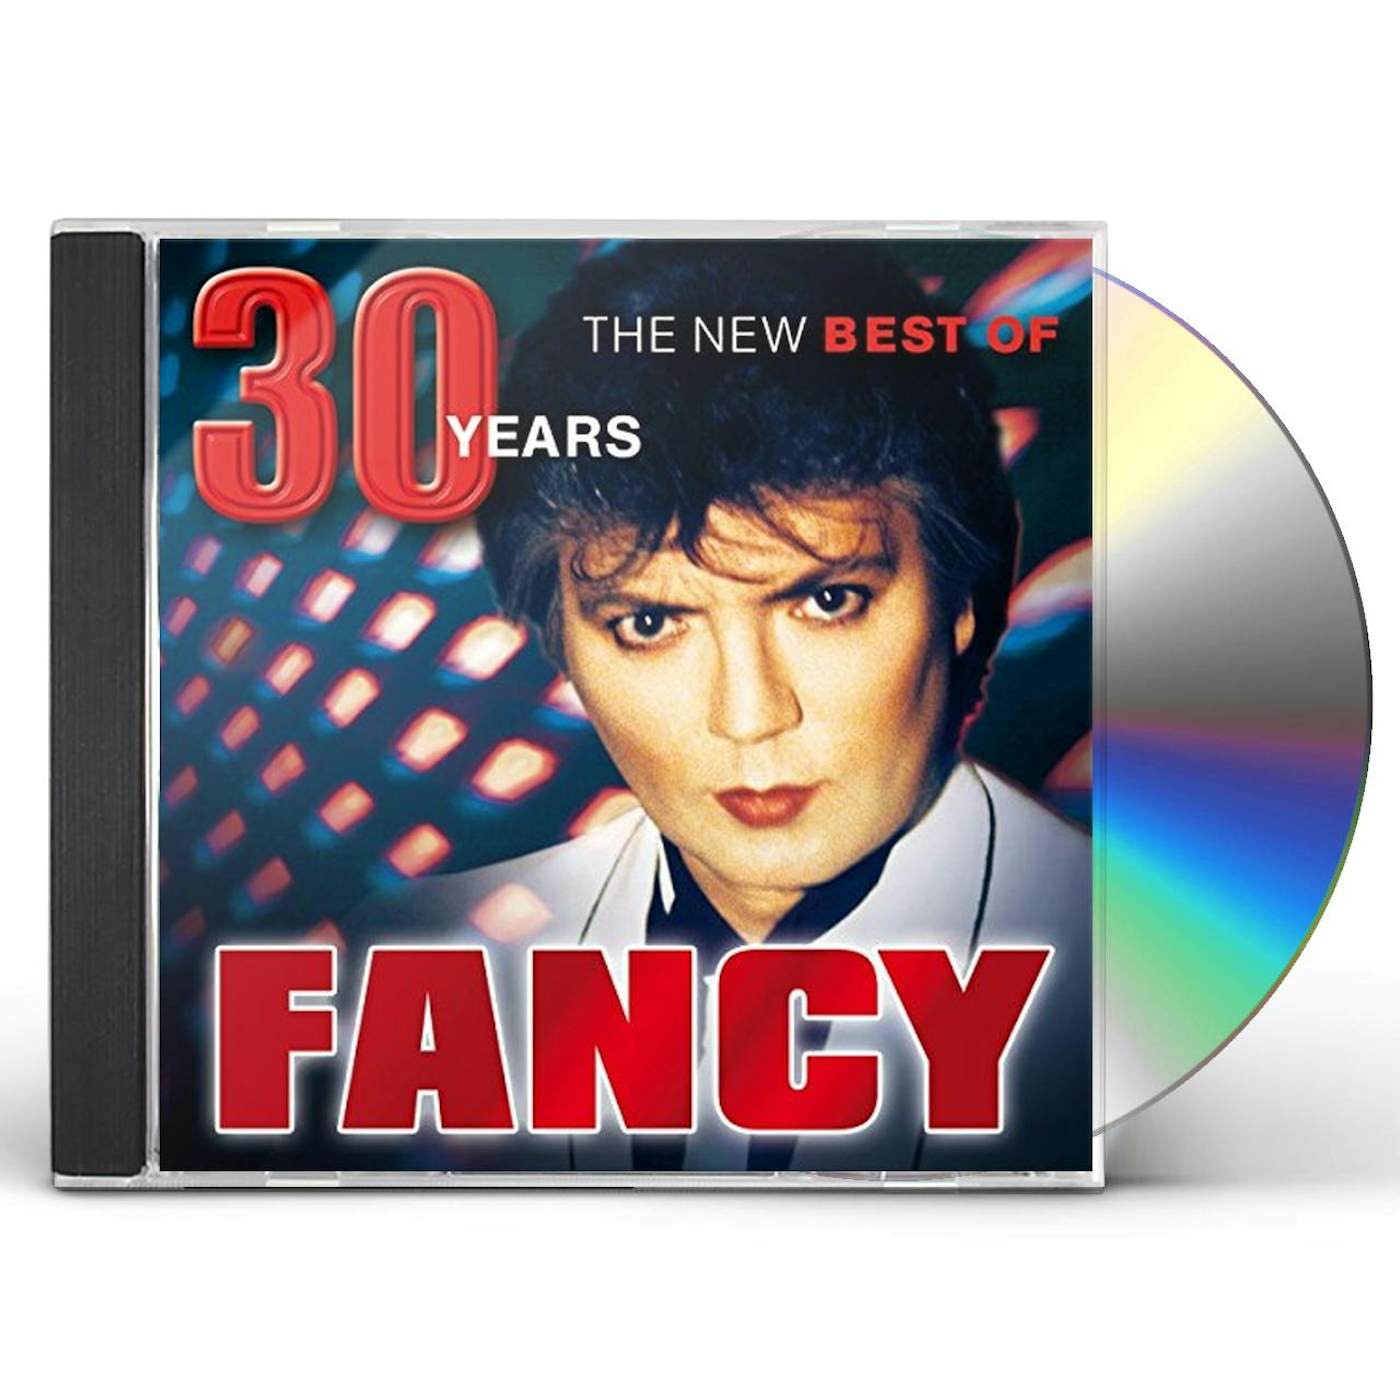 Fancy 30 YEARS: THE NEW BEST OF CD